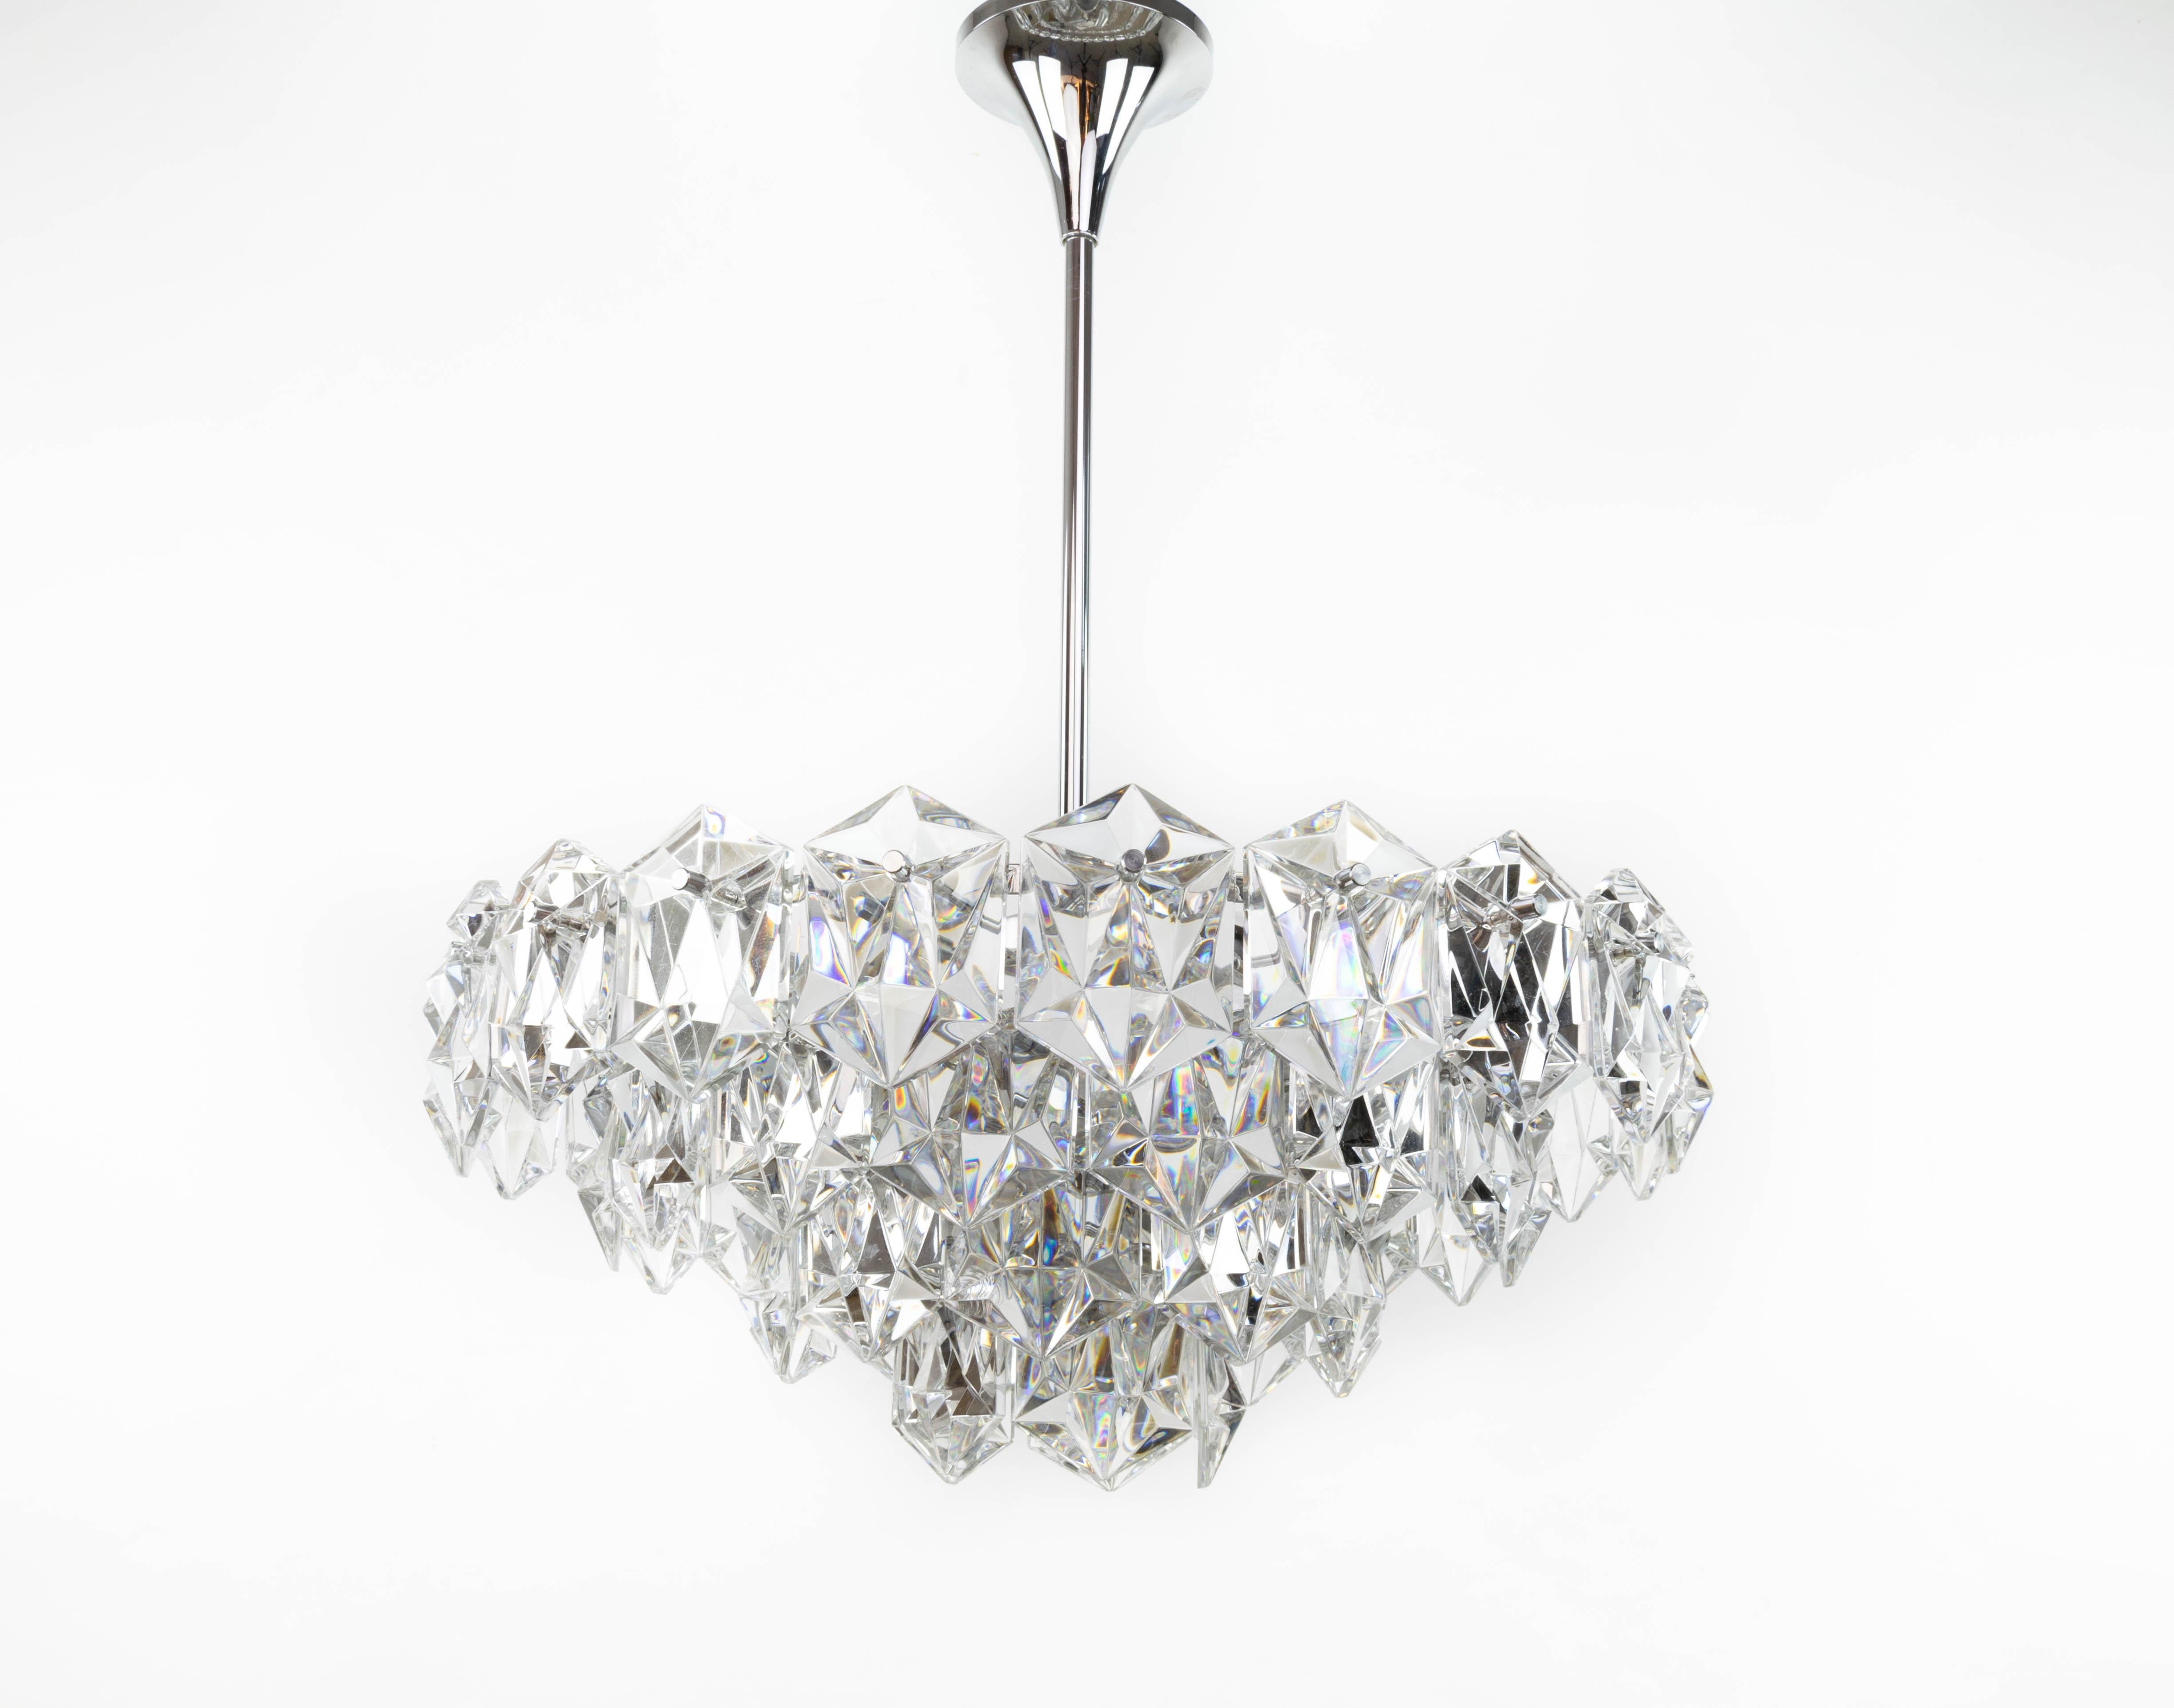 Spectacular chandelier made by the German firm Kinkeldey in the 1960s.
Chromed steel structure, six sockets for E27 socket and 50 crystals 10 cm long and 7 cm wide, distributed over four levels.
Beautiful piece in my good vintage